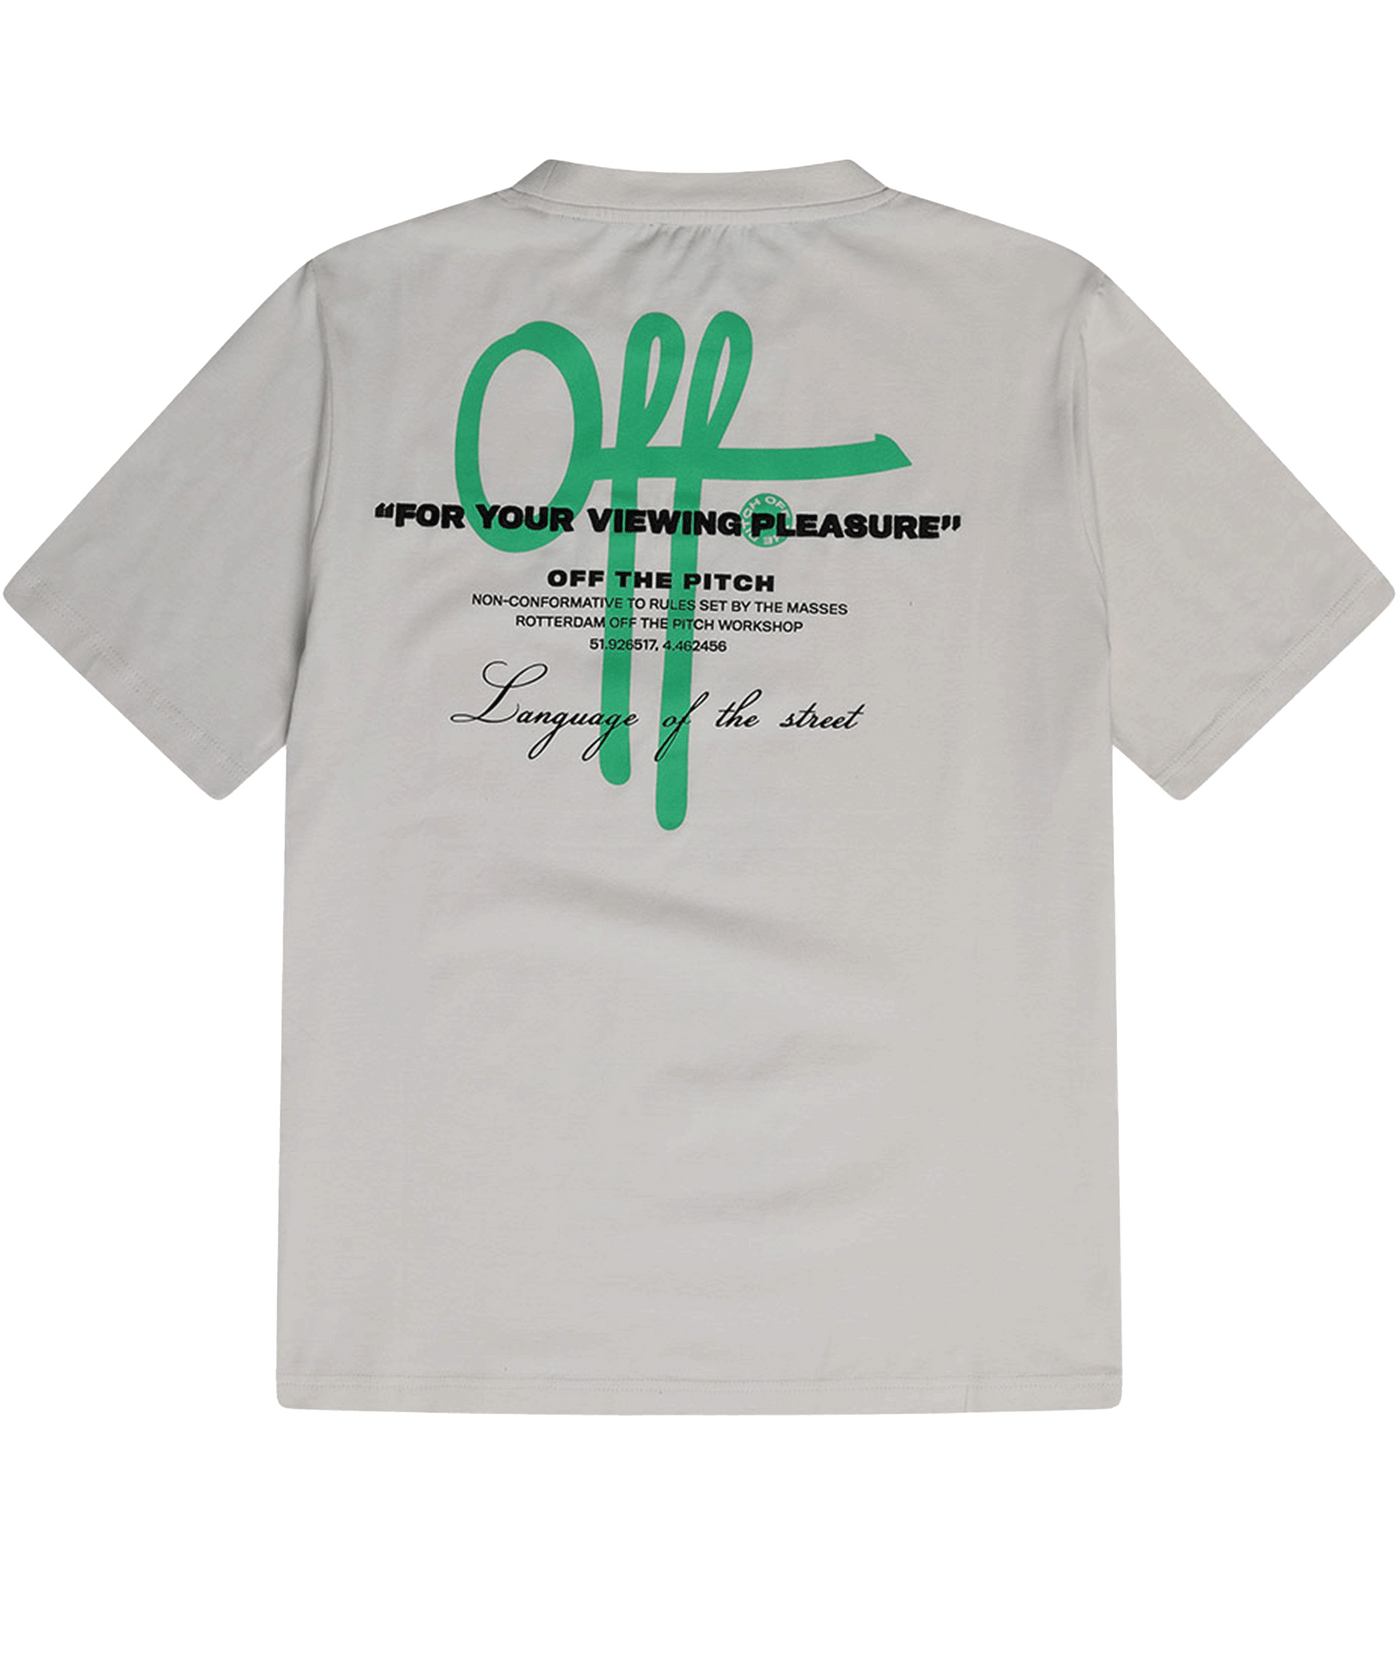 Off The Pitch - Otp233040 - Neo T-shirt - 102 Egret